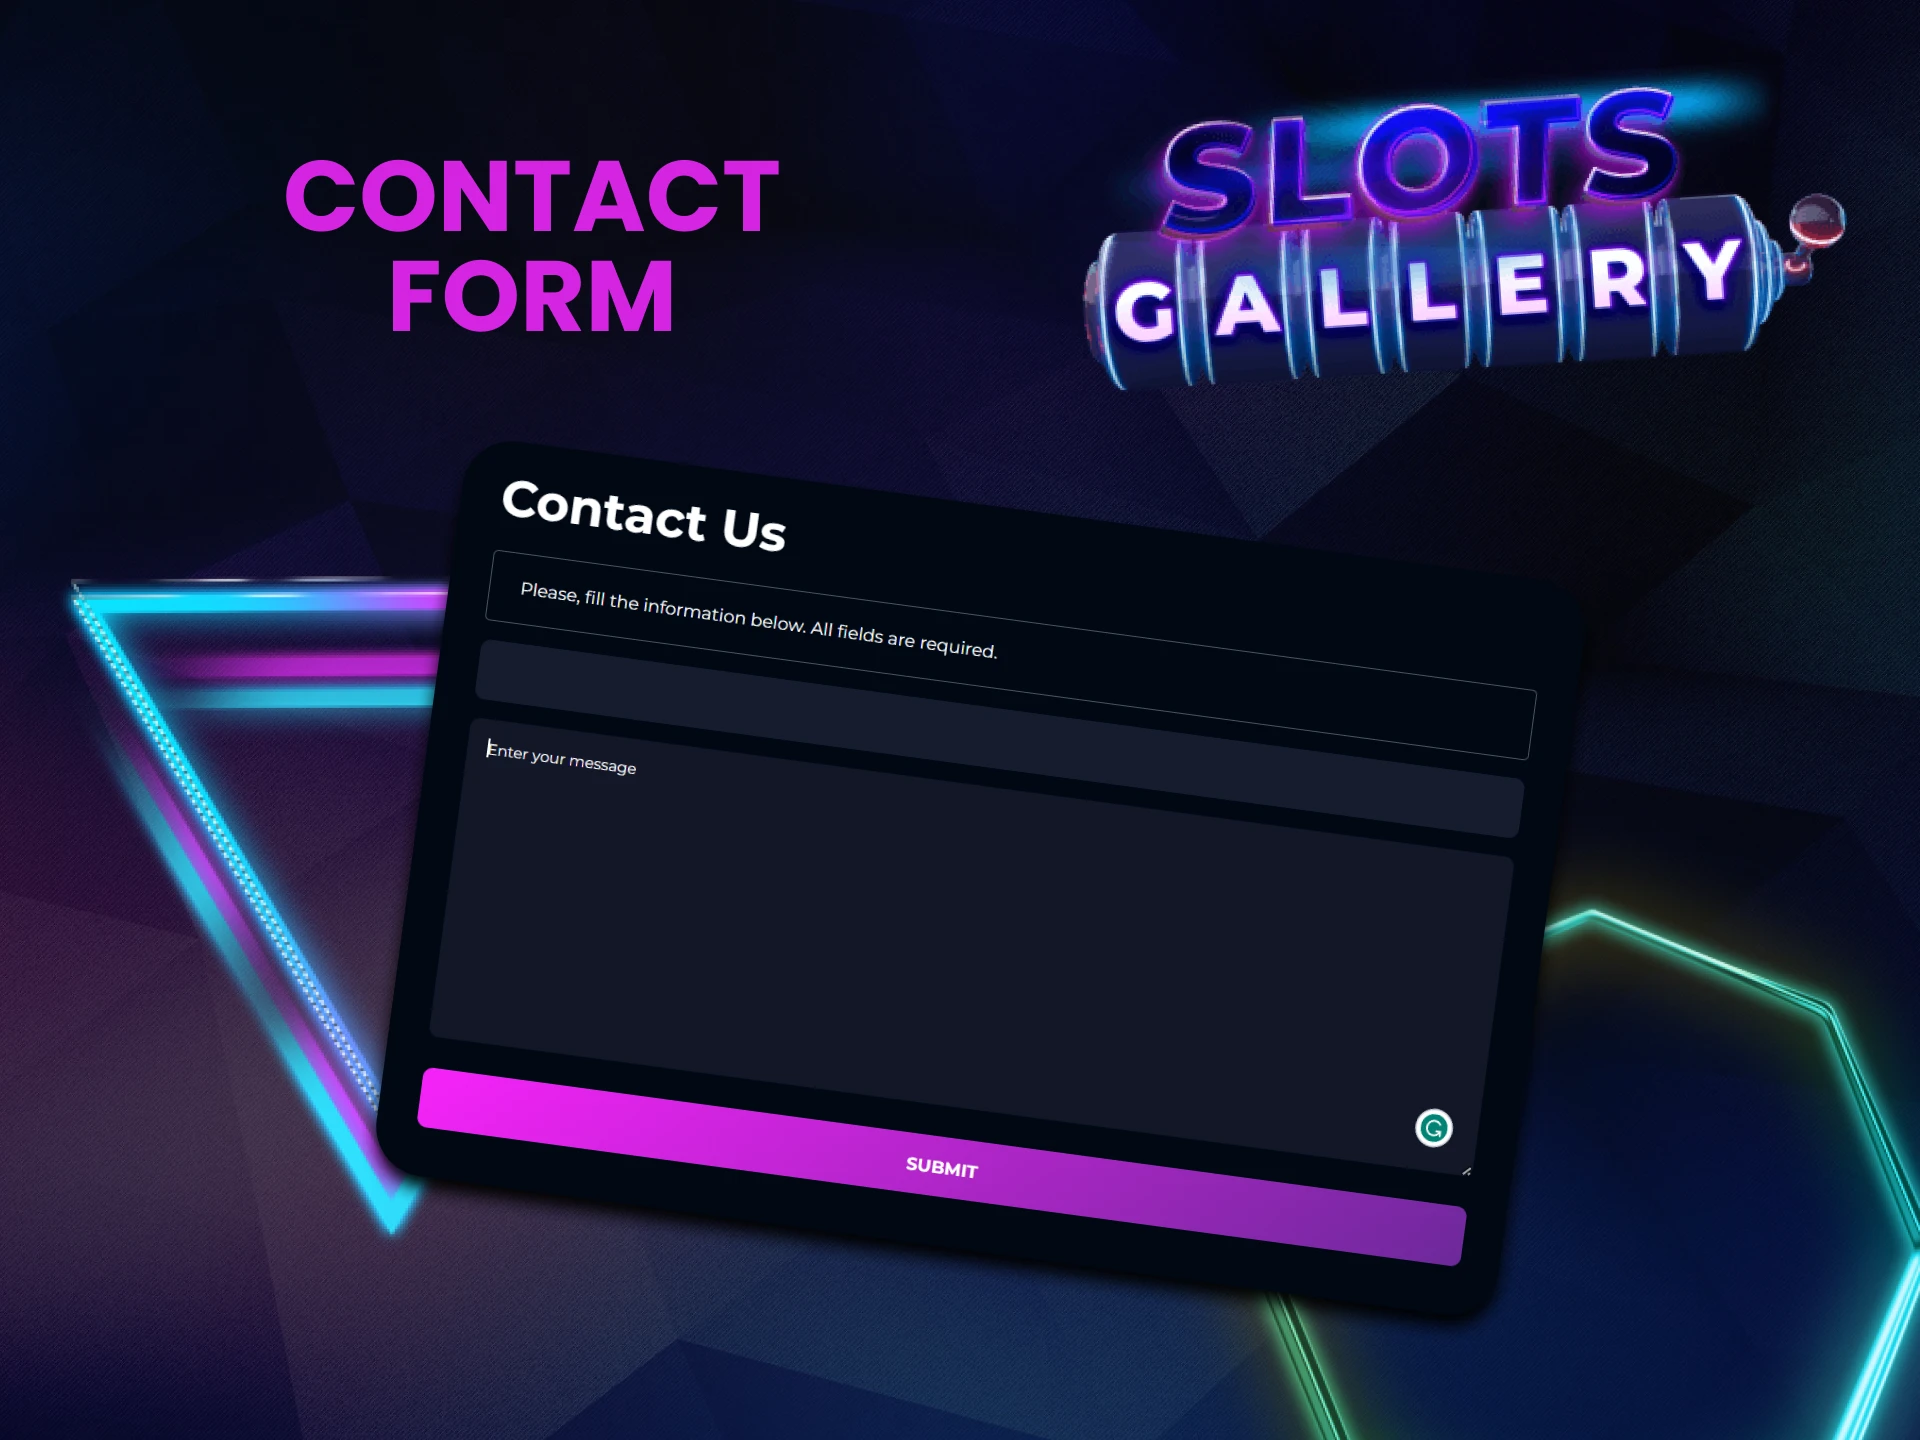 You can contact the Slots Gallery team via contact form.